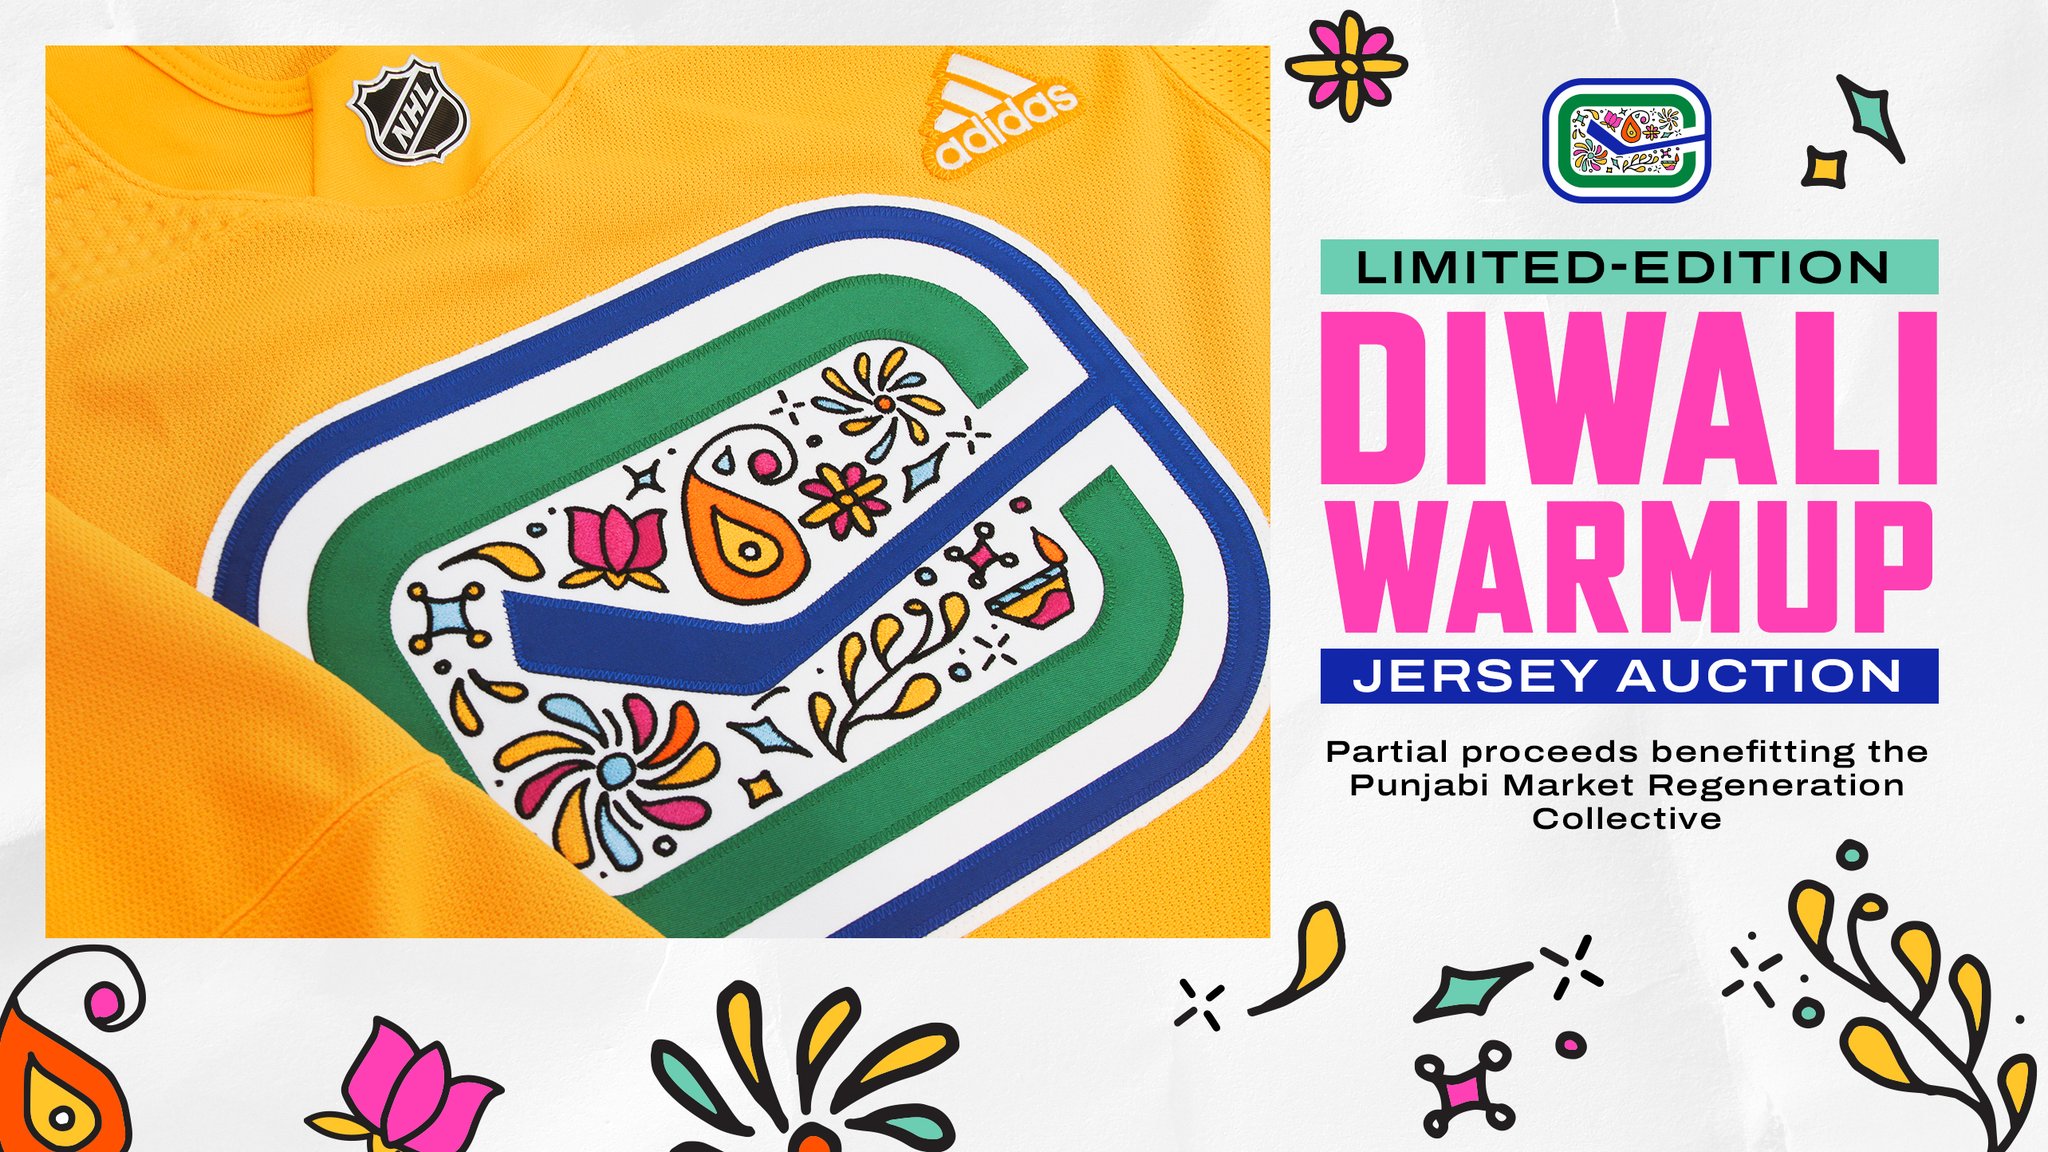 TSN - The Vancouver Canucks launch a limited edition Diwali warm-up  jersey!🤩 (📸: @canucks)